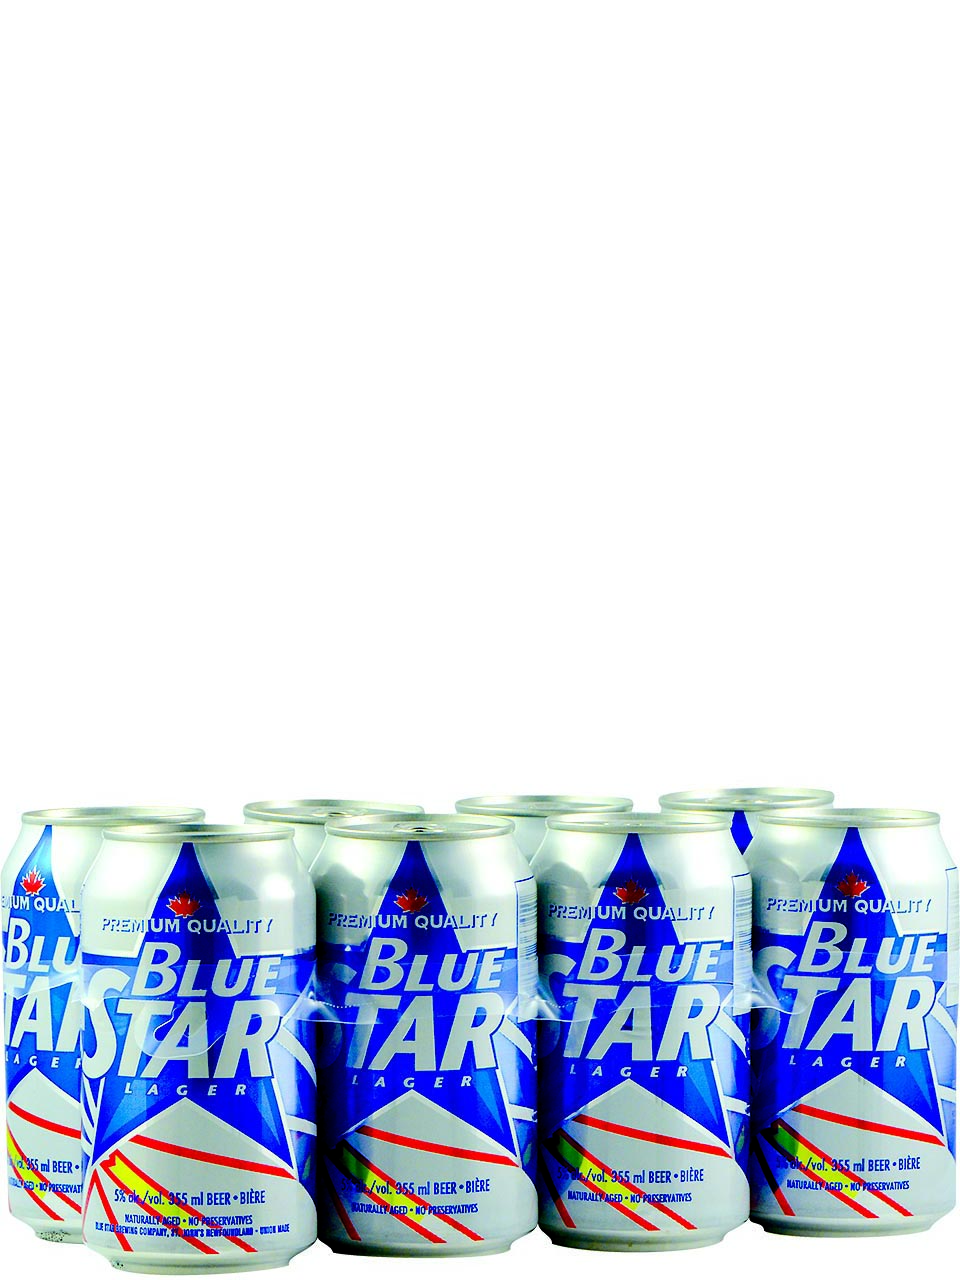 Blue Star Cans 8pk